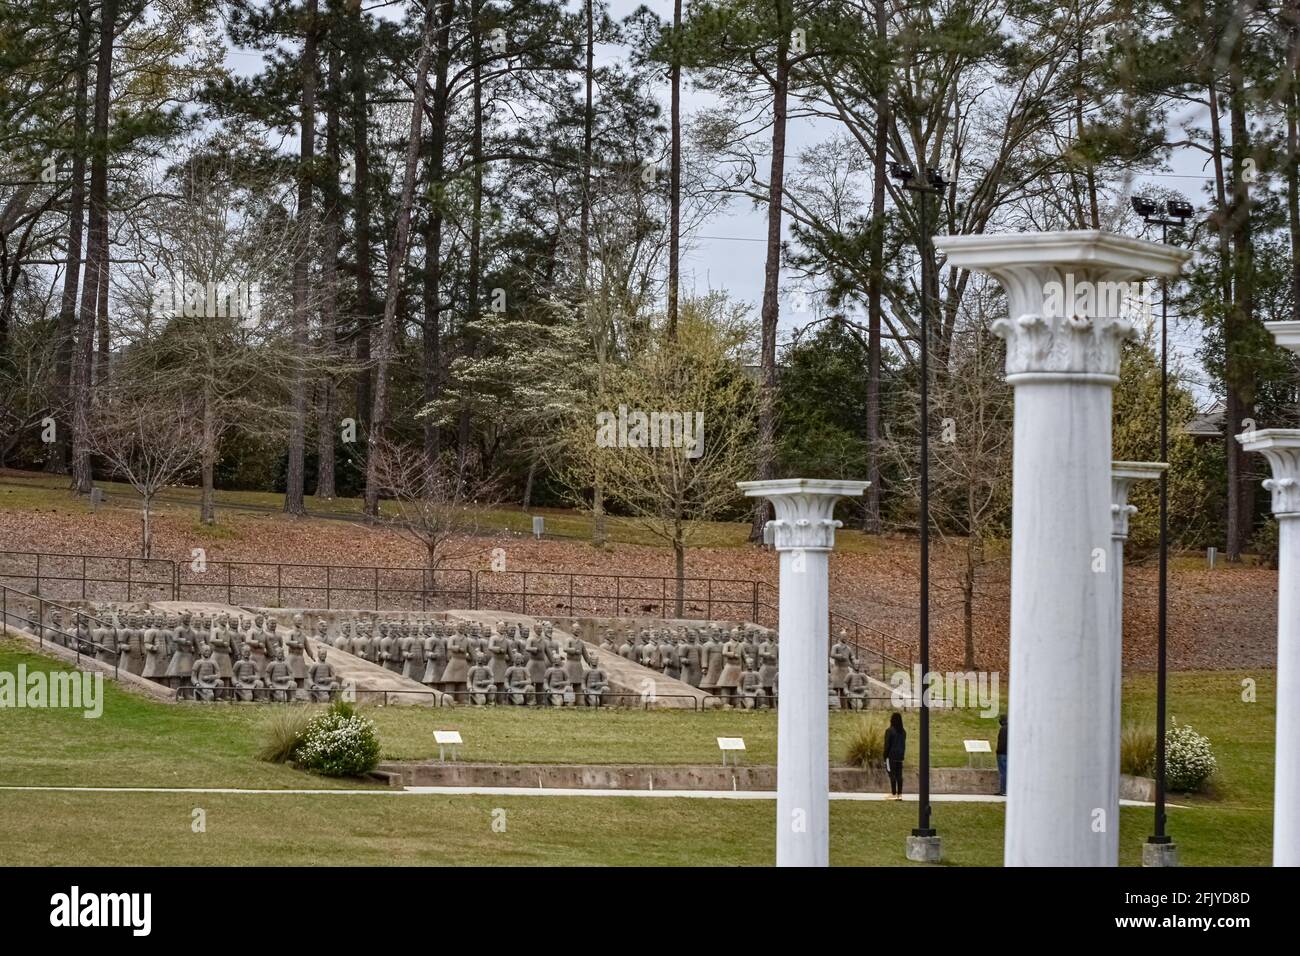 Troy, Alabama, USA-March 20, 2021: Wide angle view of  Janice Hawkins Cultural Arts Park on the campus of Troy University, home to Terracotta Warriors Stock Photo